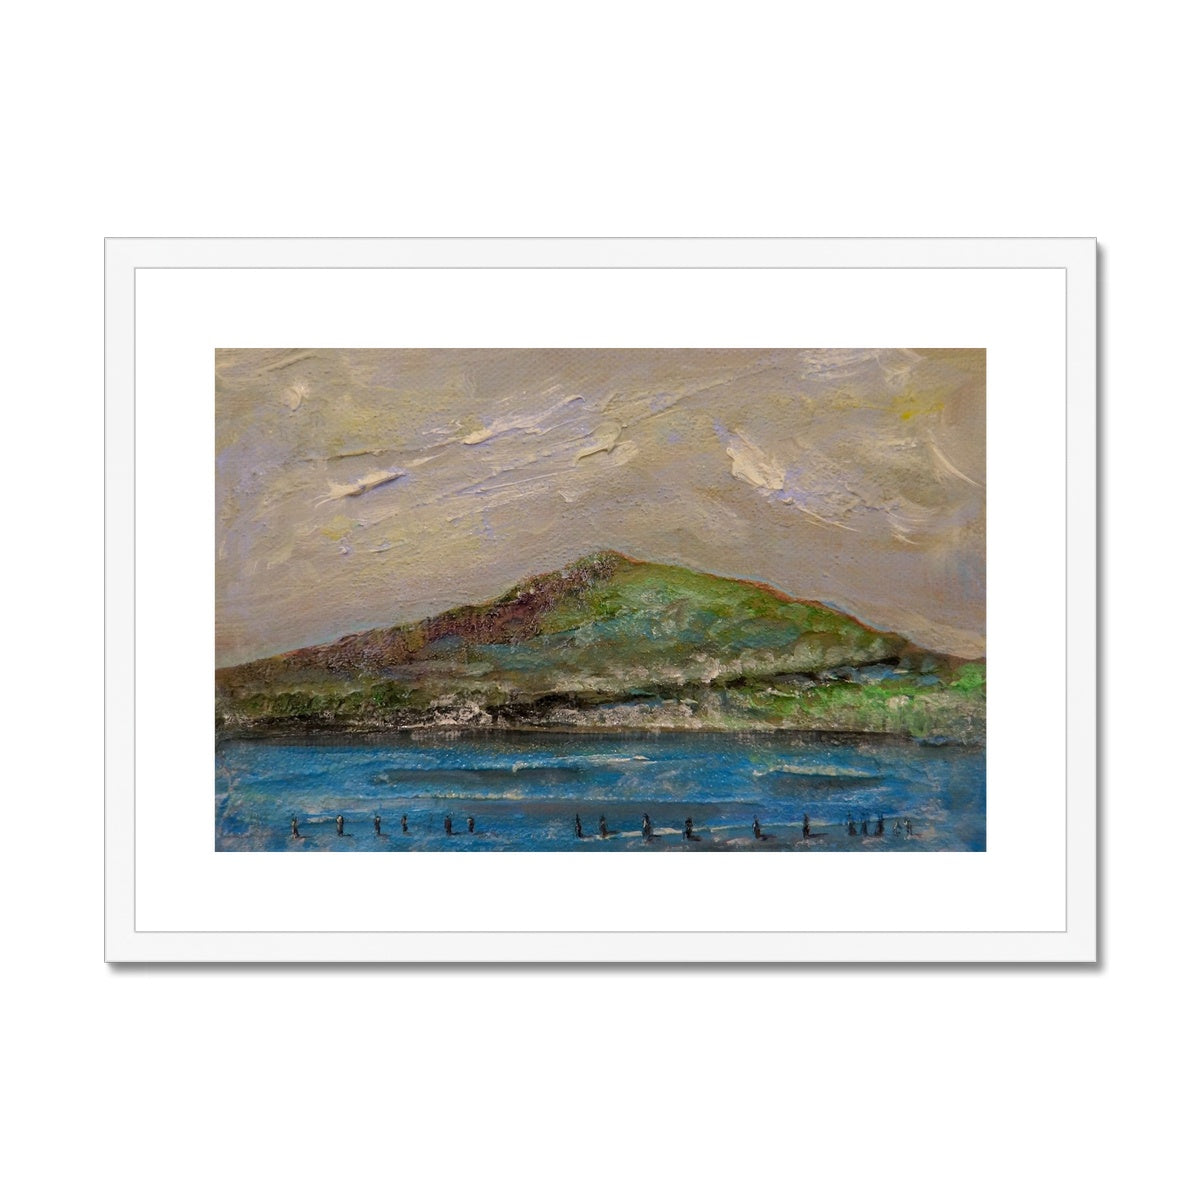 Ben Lomond iii Painting | Framed & Mounted Prints From Scotland-Framed & Mounted Prints-Scottish Lochs & Mountains Art Gallery-A2 Landscape-White Frame-Paintings, Prints, Homeware, Art Gifts From Scotland By Scottish Artist Kevin Hunter